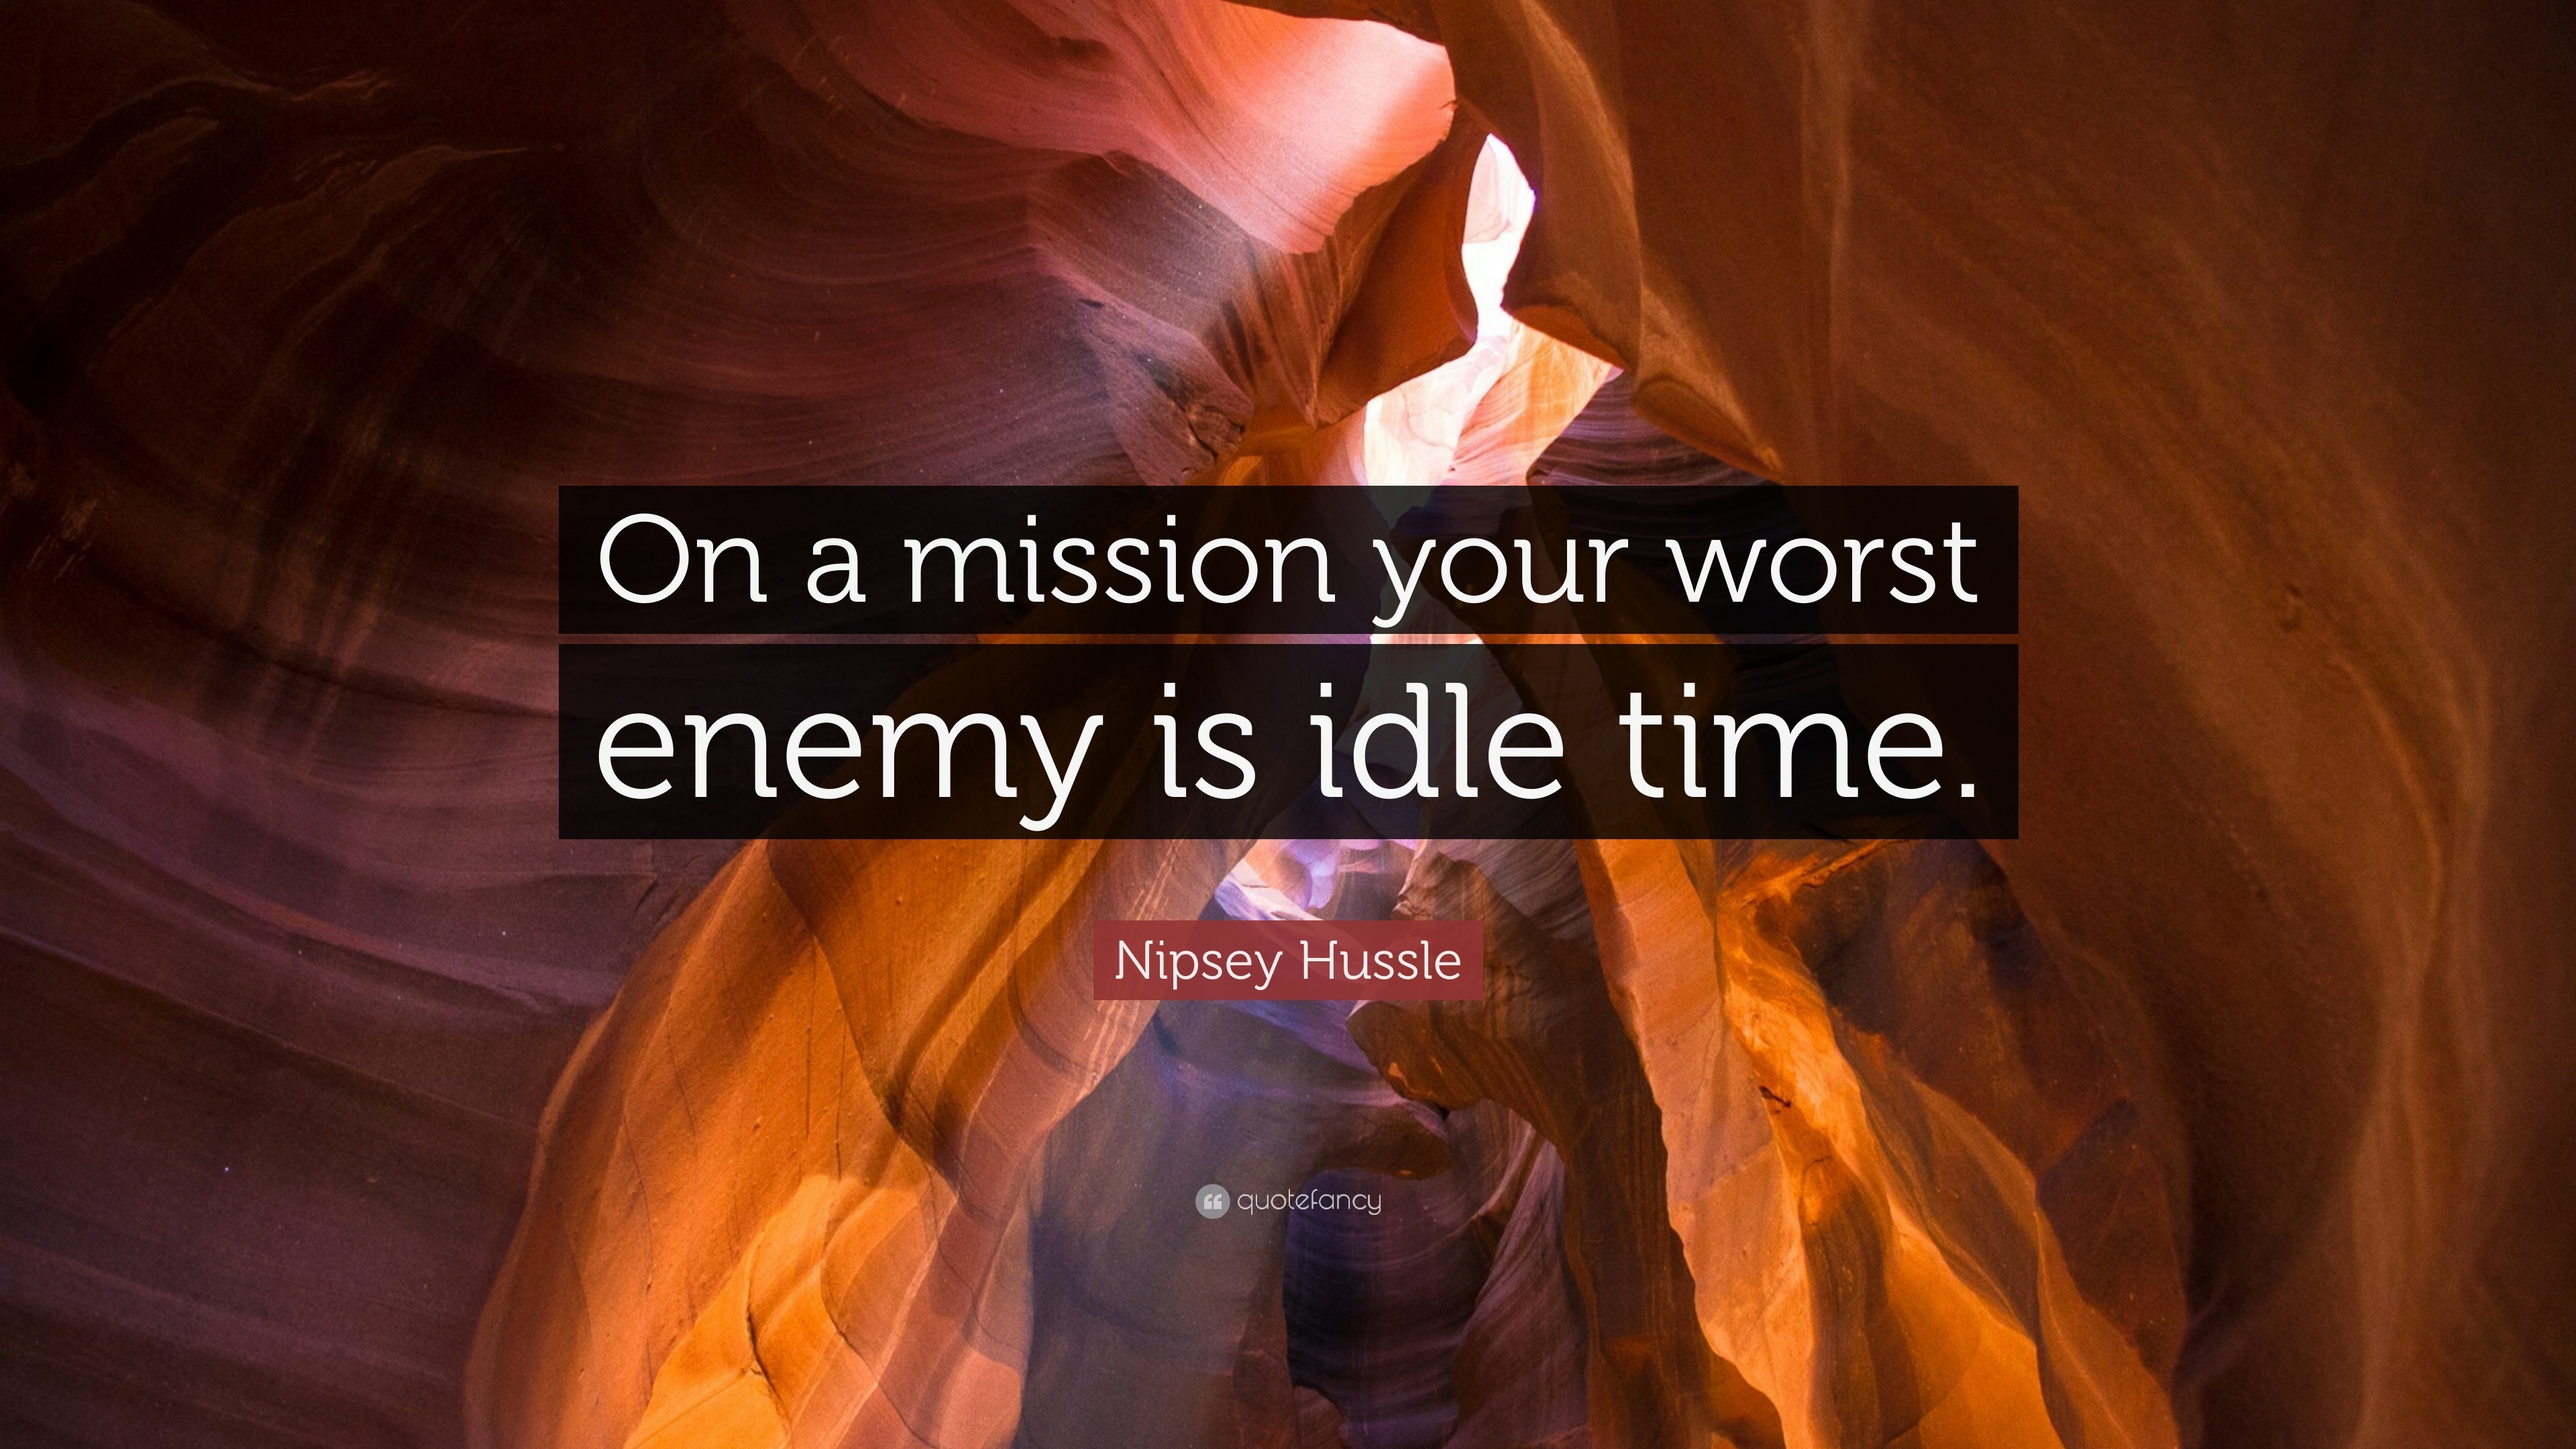 On a mission your worst enemy is idle time: by Enough, IAM